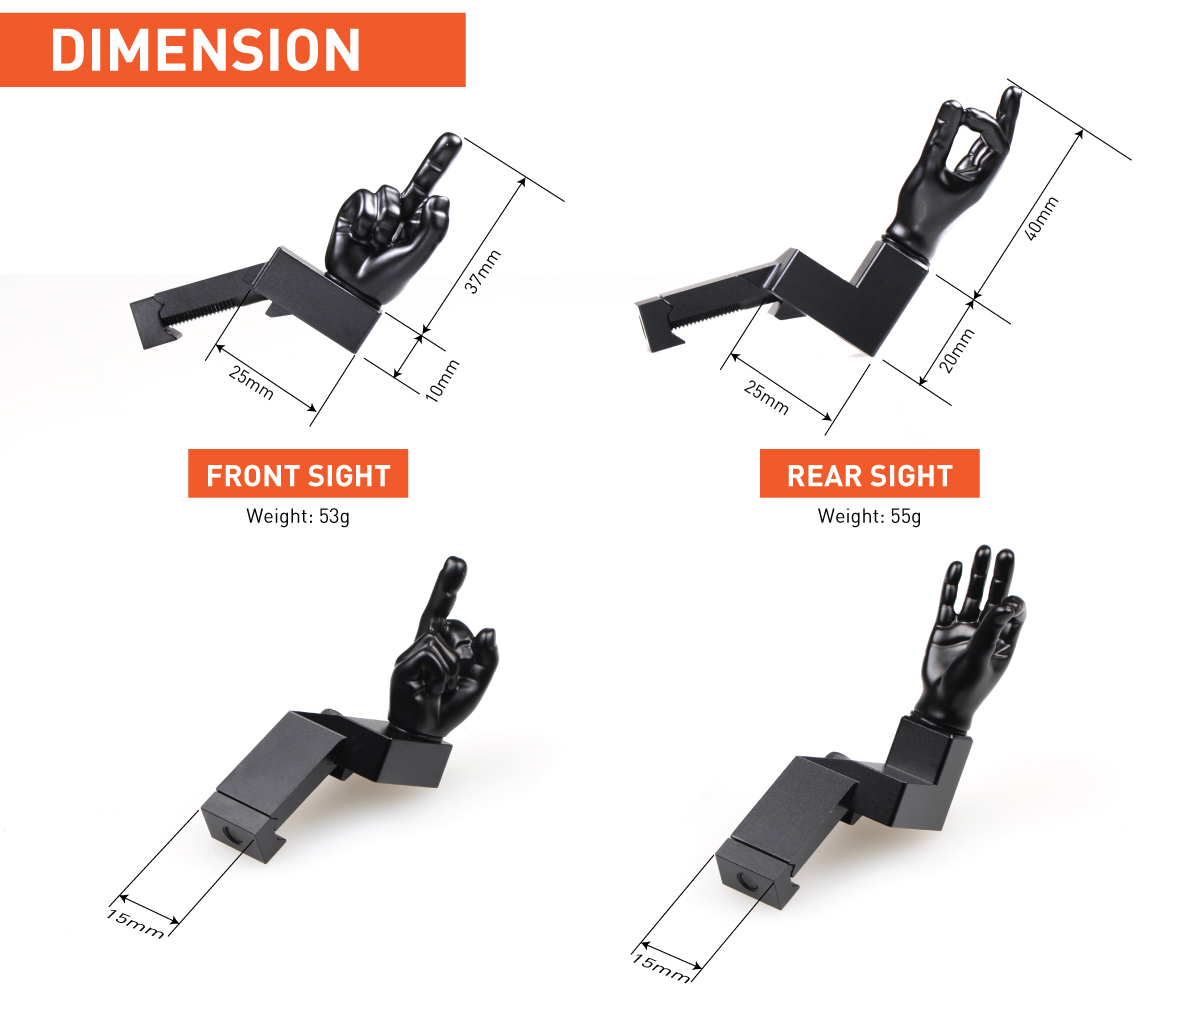 Stinger Novelty Finger Sights Set, Offset 45 Degree, OK Hand, Middle Finger, Flip Off, Backup Front and Rear Iron Sight BUIS Set, Fit Picatinny Rail and Weaver Rail, AR-15, Rifle